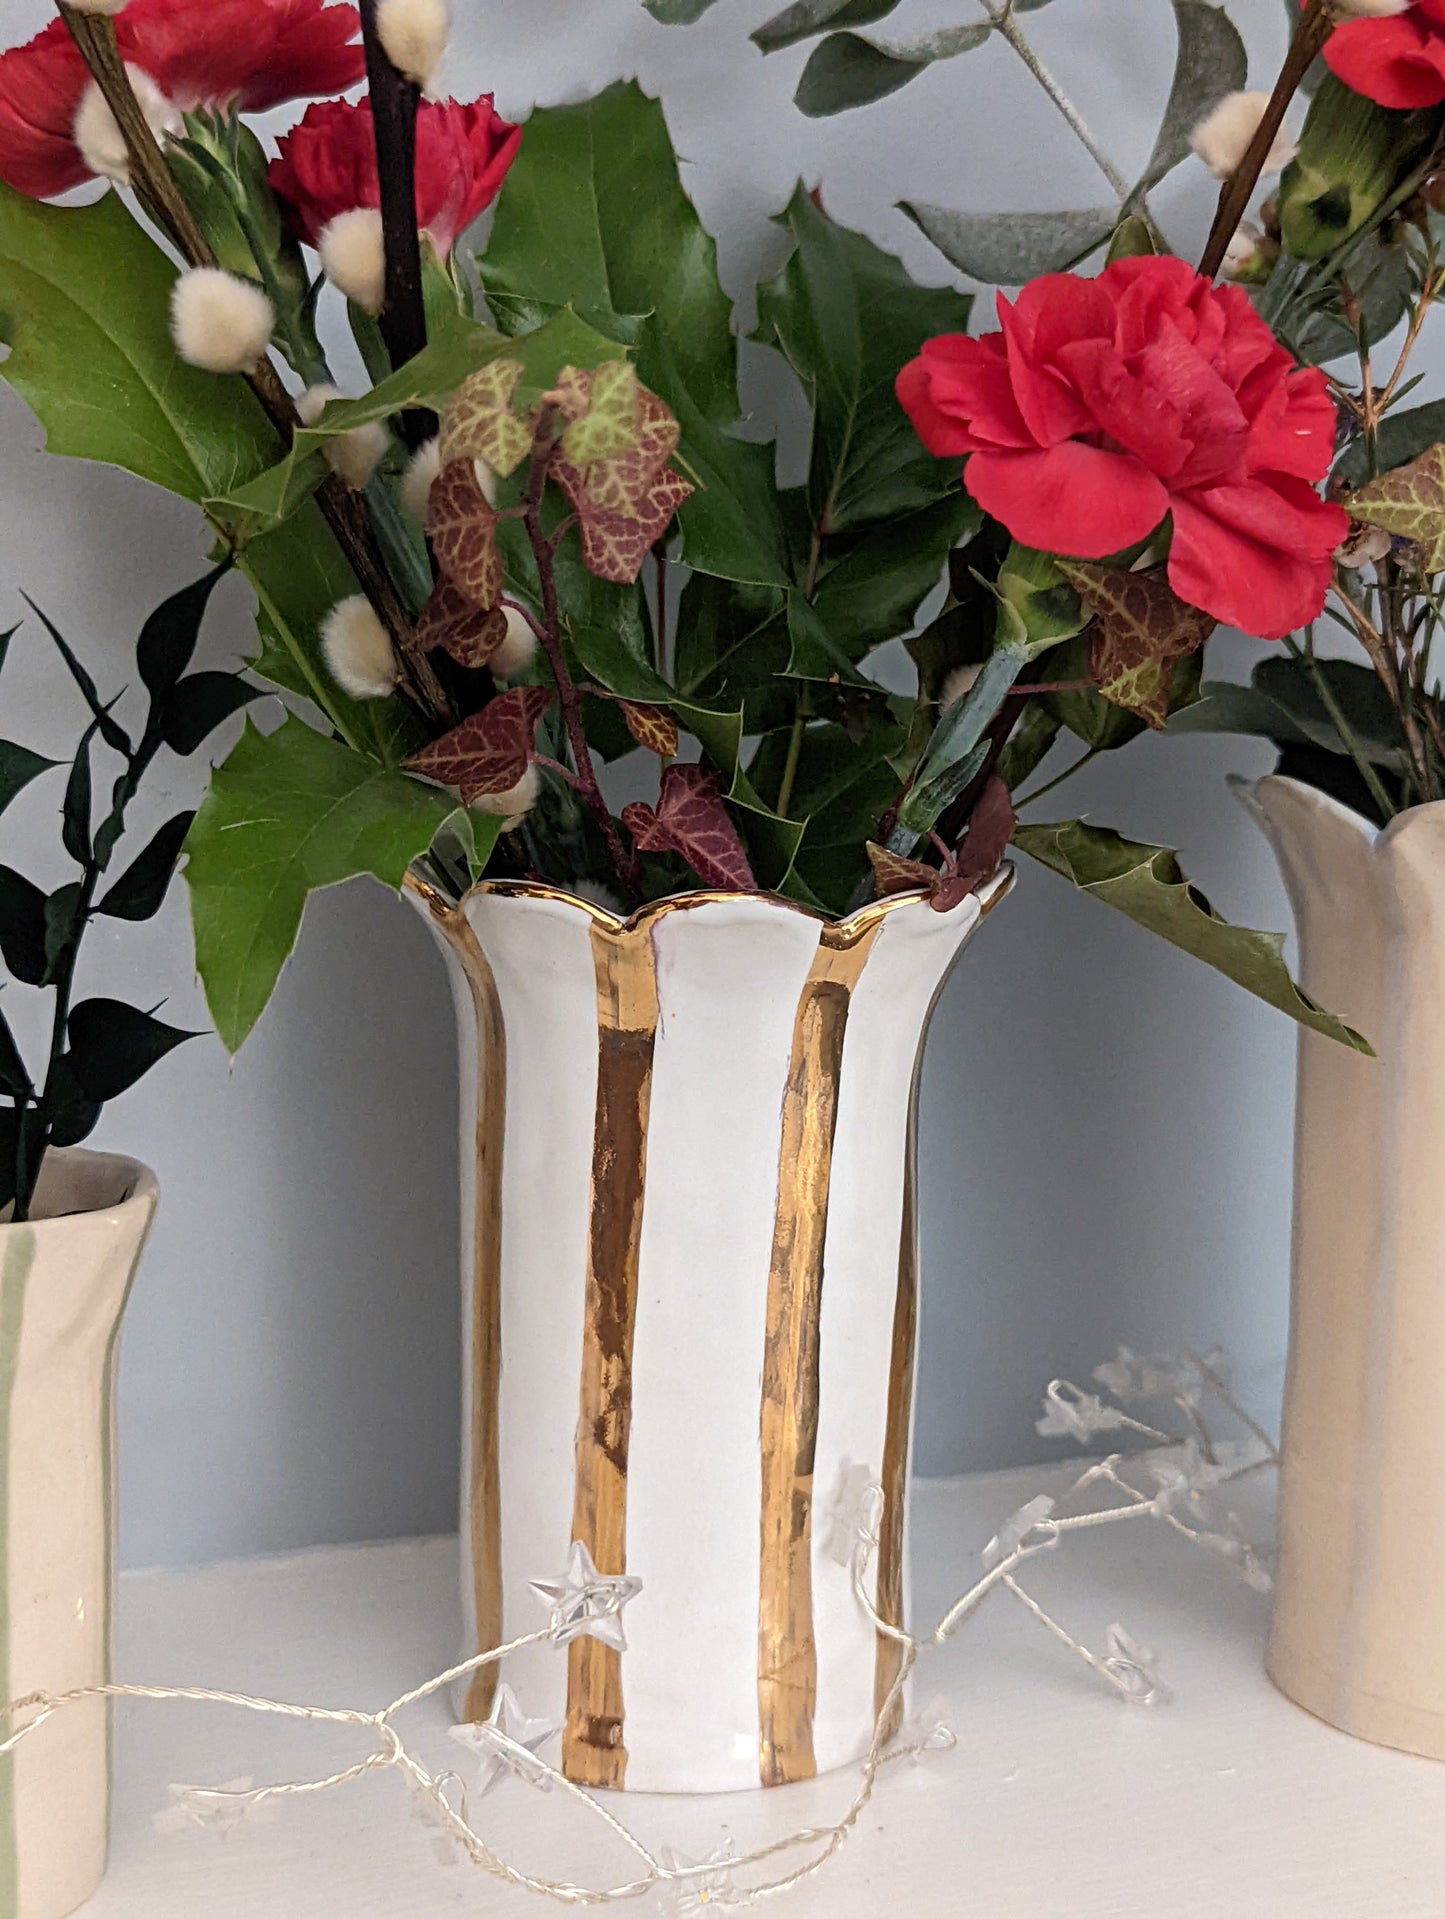 Sea Bramble ceramics - Handmade Stoneware Daisy vase with gold stripes and that Sea Bramble' signature scalloped top. This close-up photo is of the vase adorned with a beautiful flower arrangement.